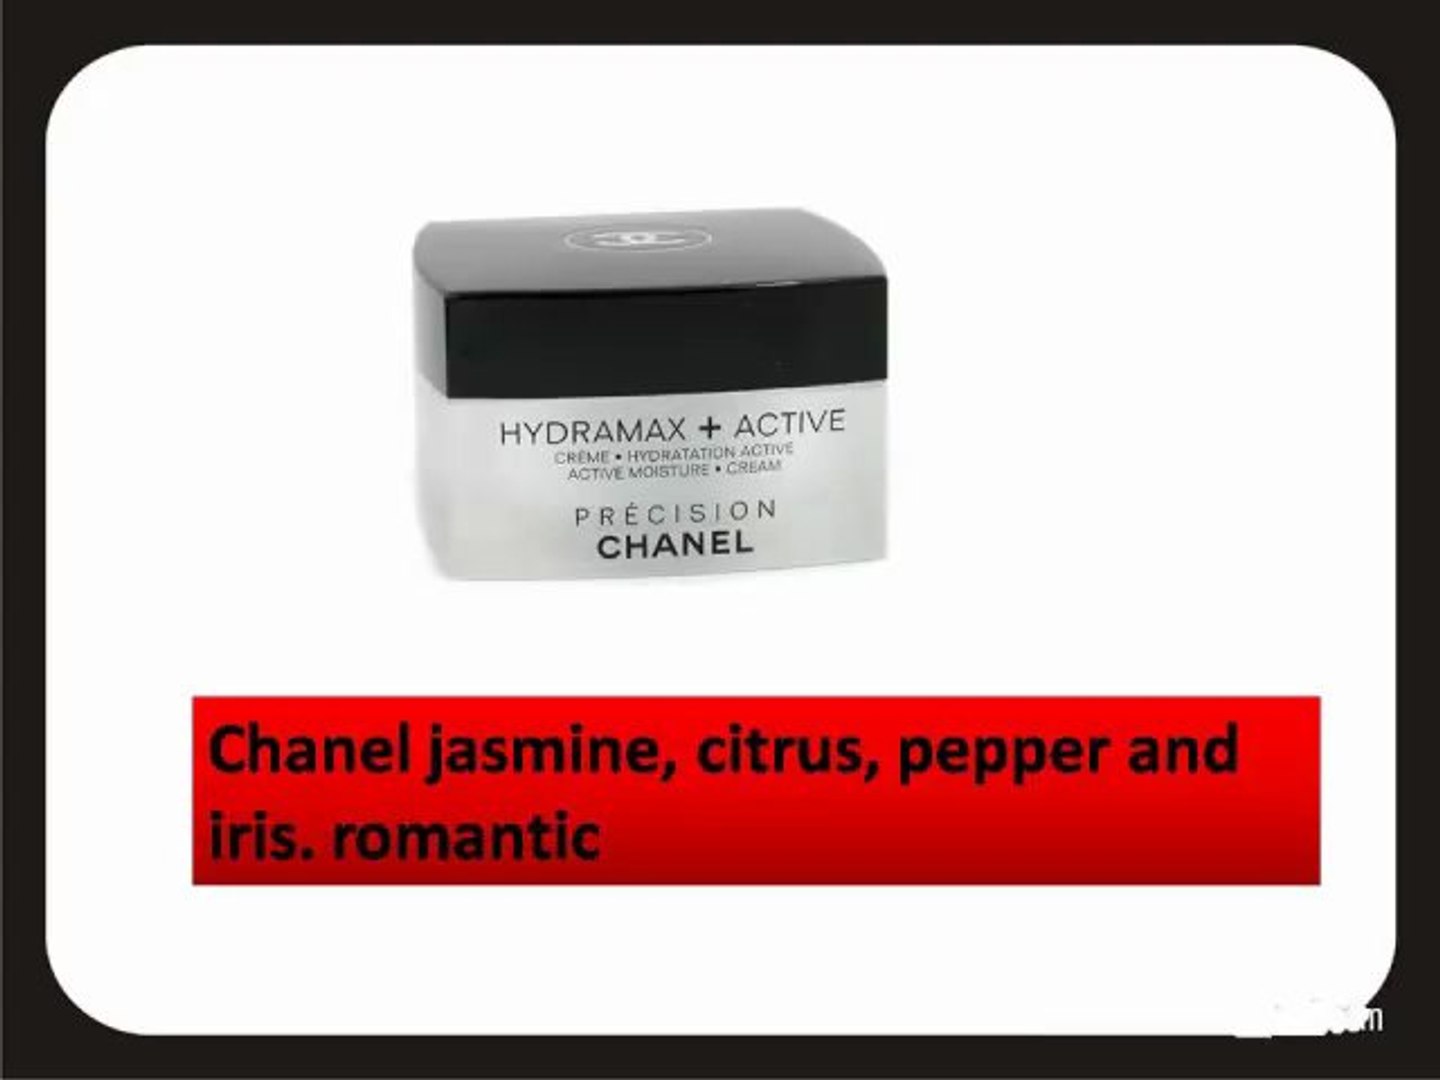 BEST chanel skin care - CHANEL by Chanel Precision Hydramax Active Moisture  Cream - video Dailymotion